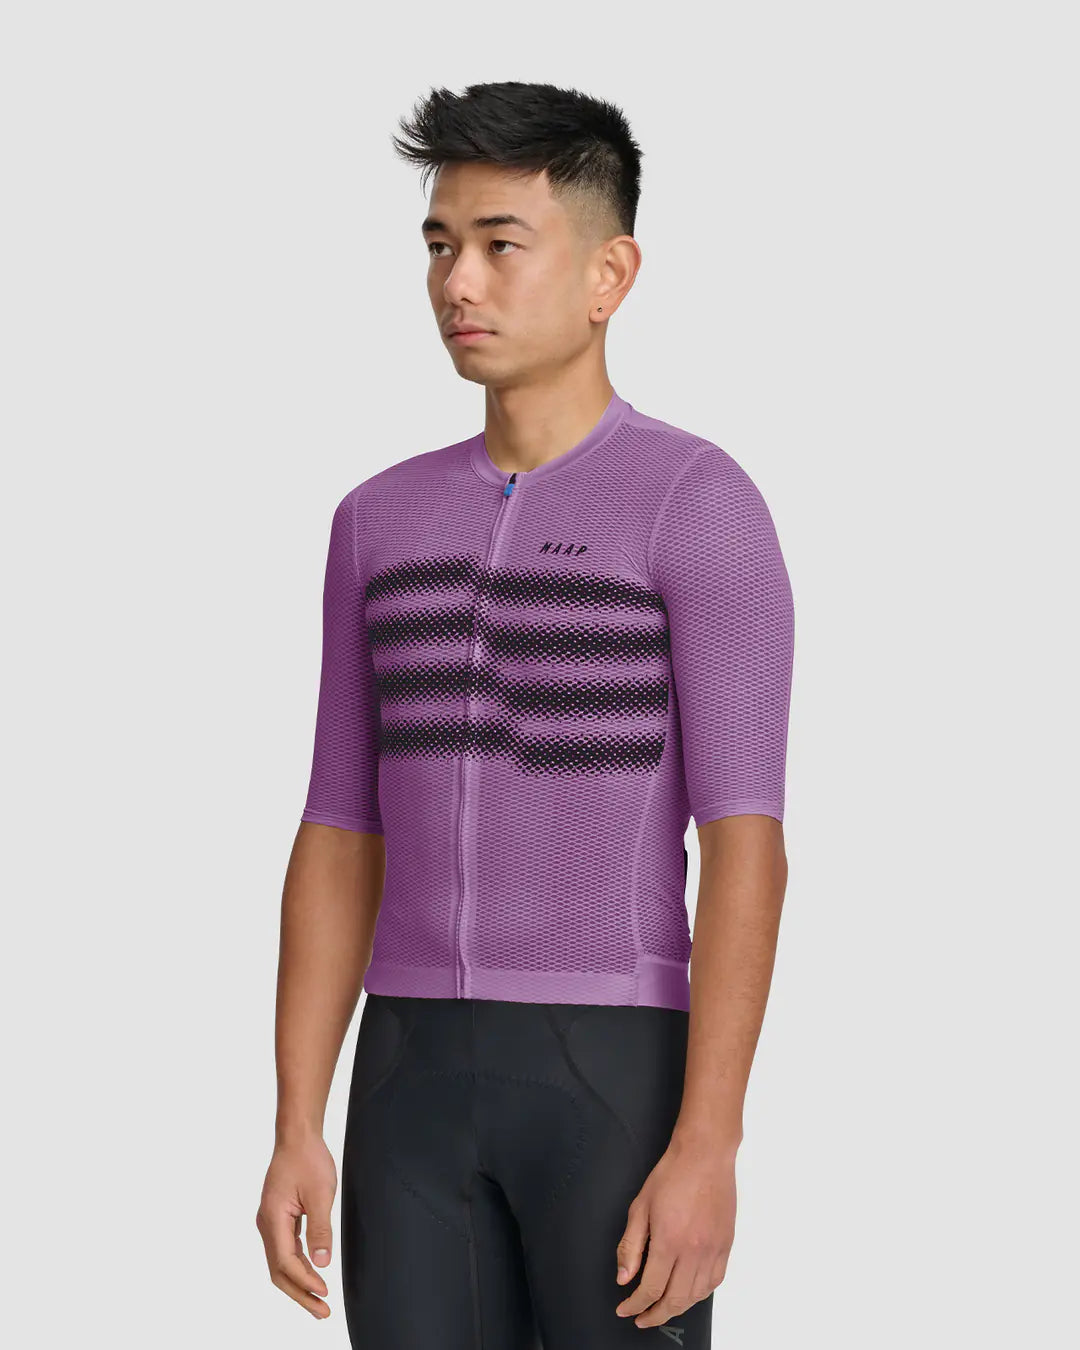 MAAP Blurred Out Ultralight Pro Plum サイクルジャージ | CYCLISM